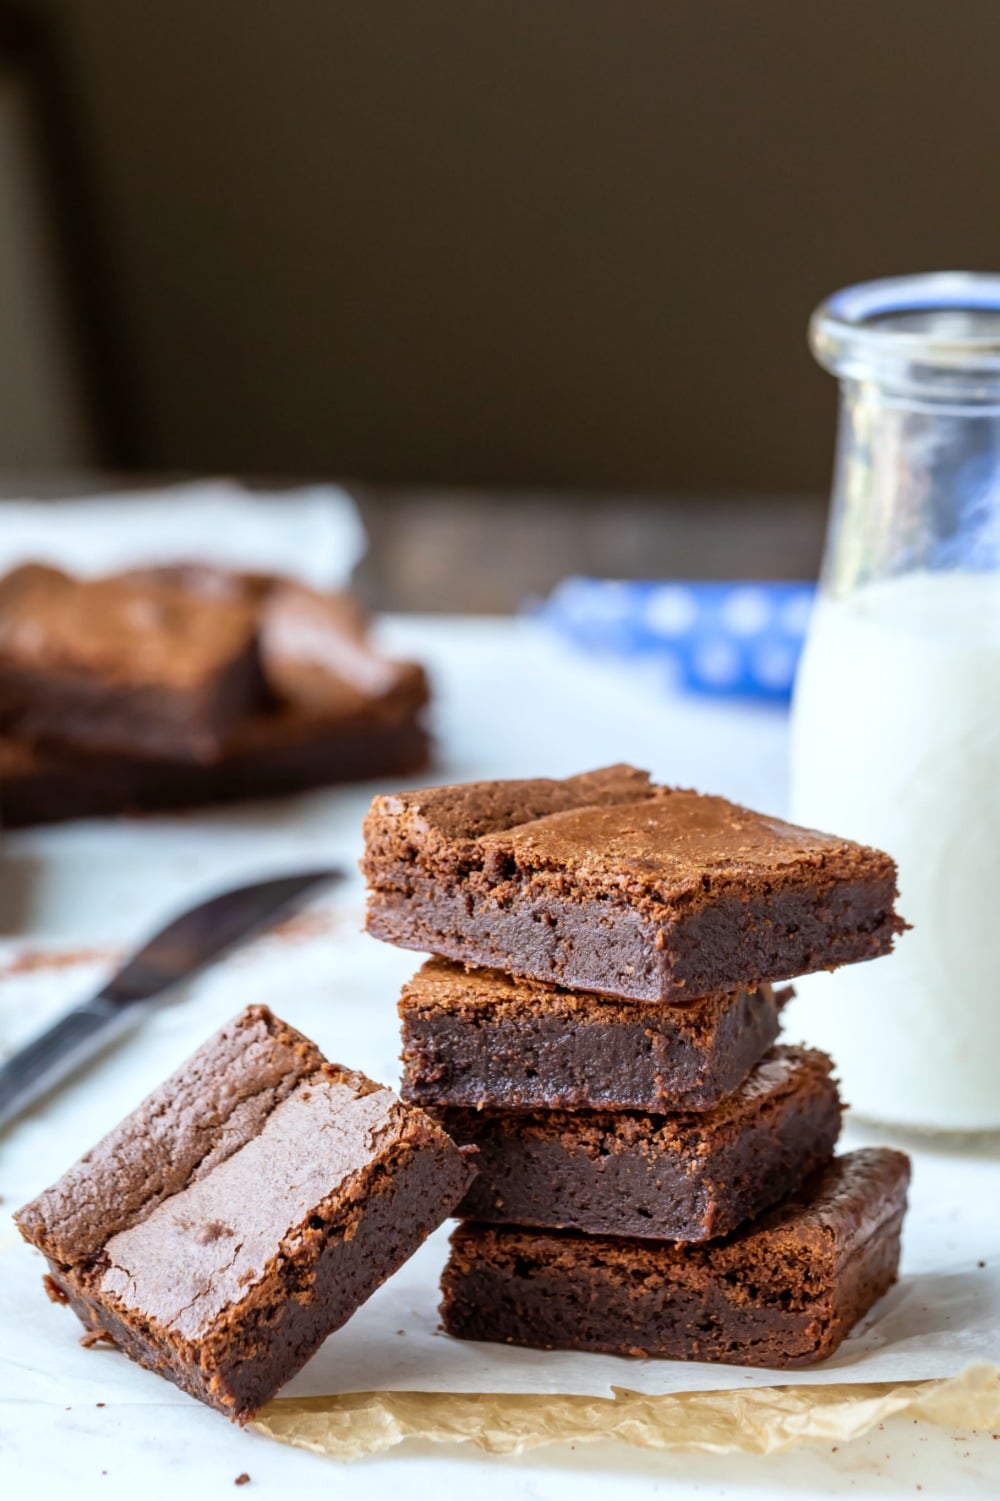 Stack of chewy fudge brownies next to a glass milk bottle